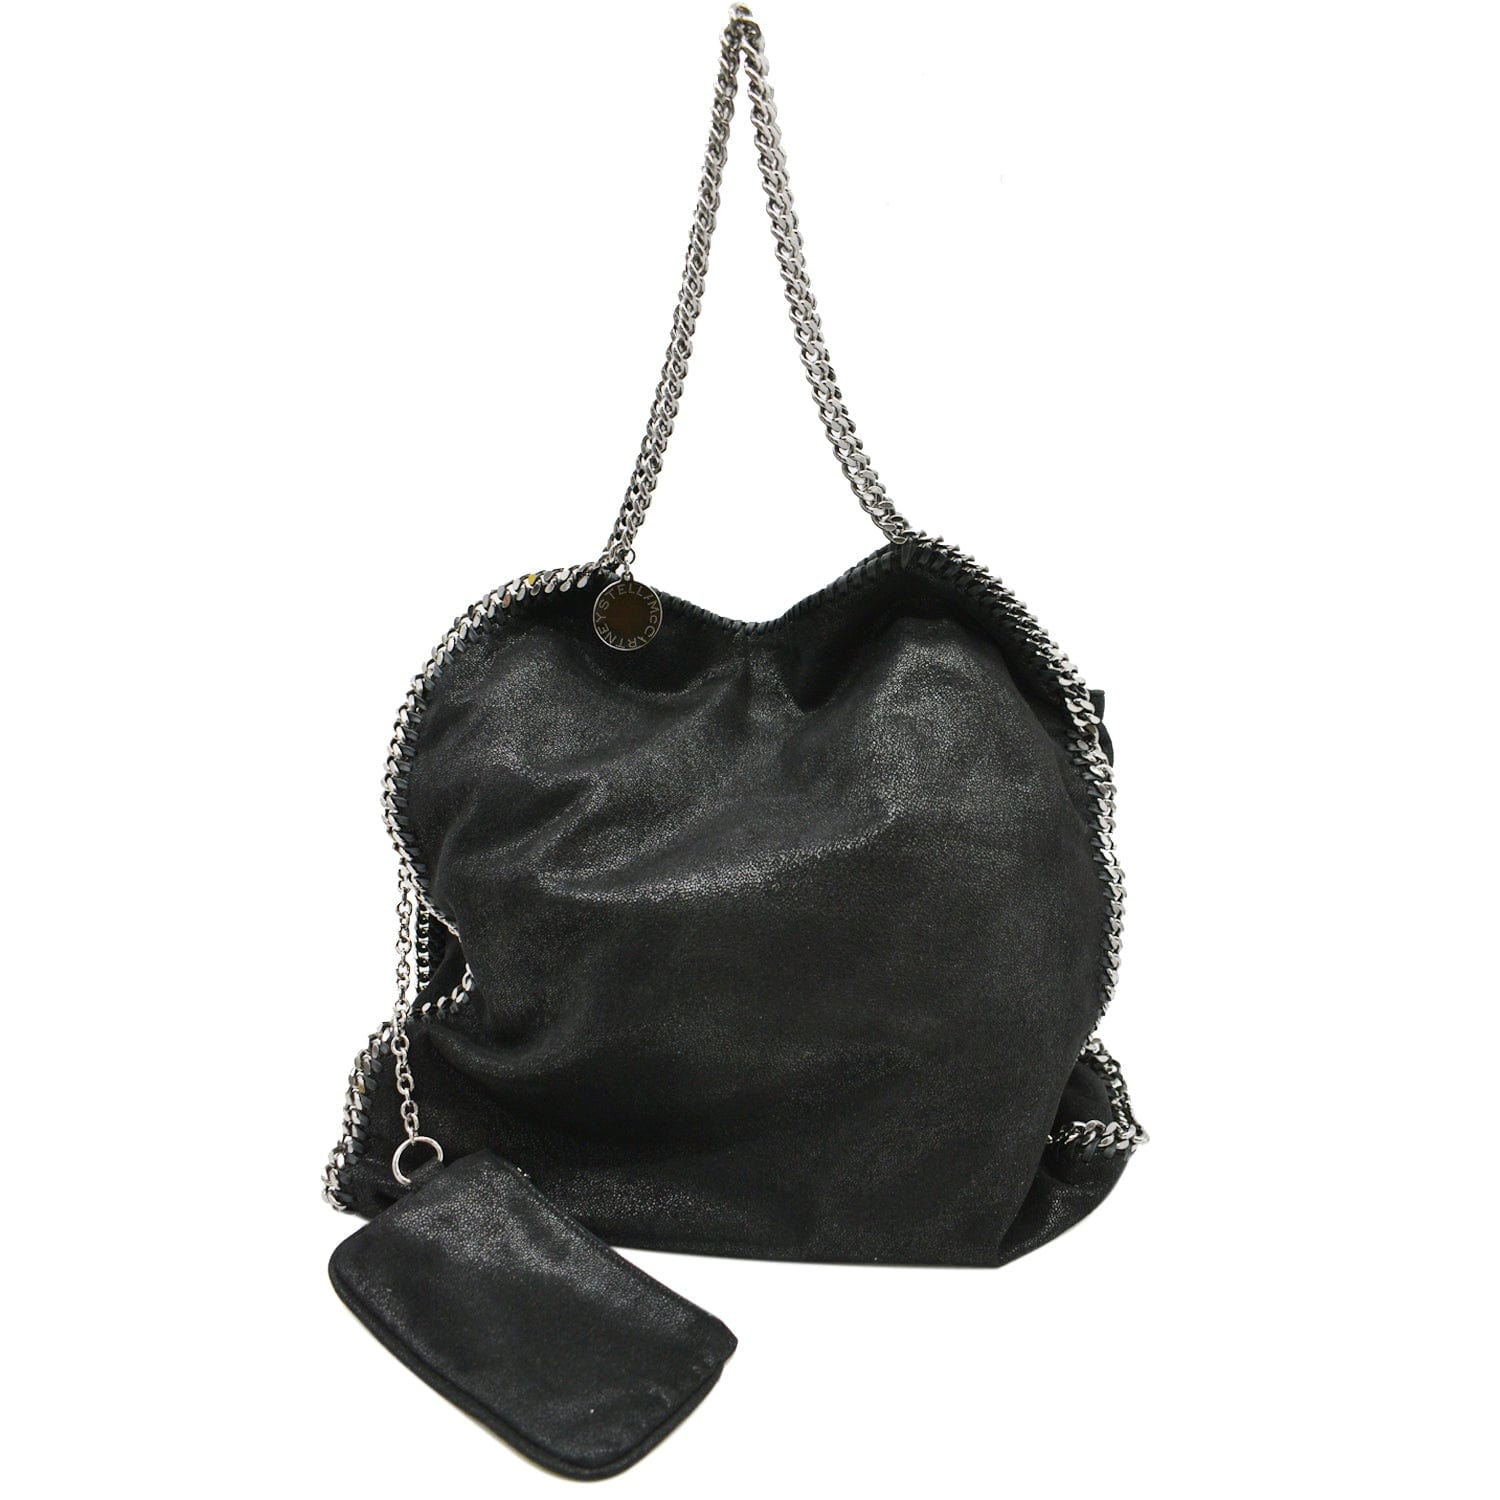 Faux Leather and Chain Detail Bag